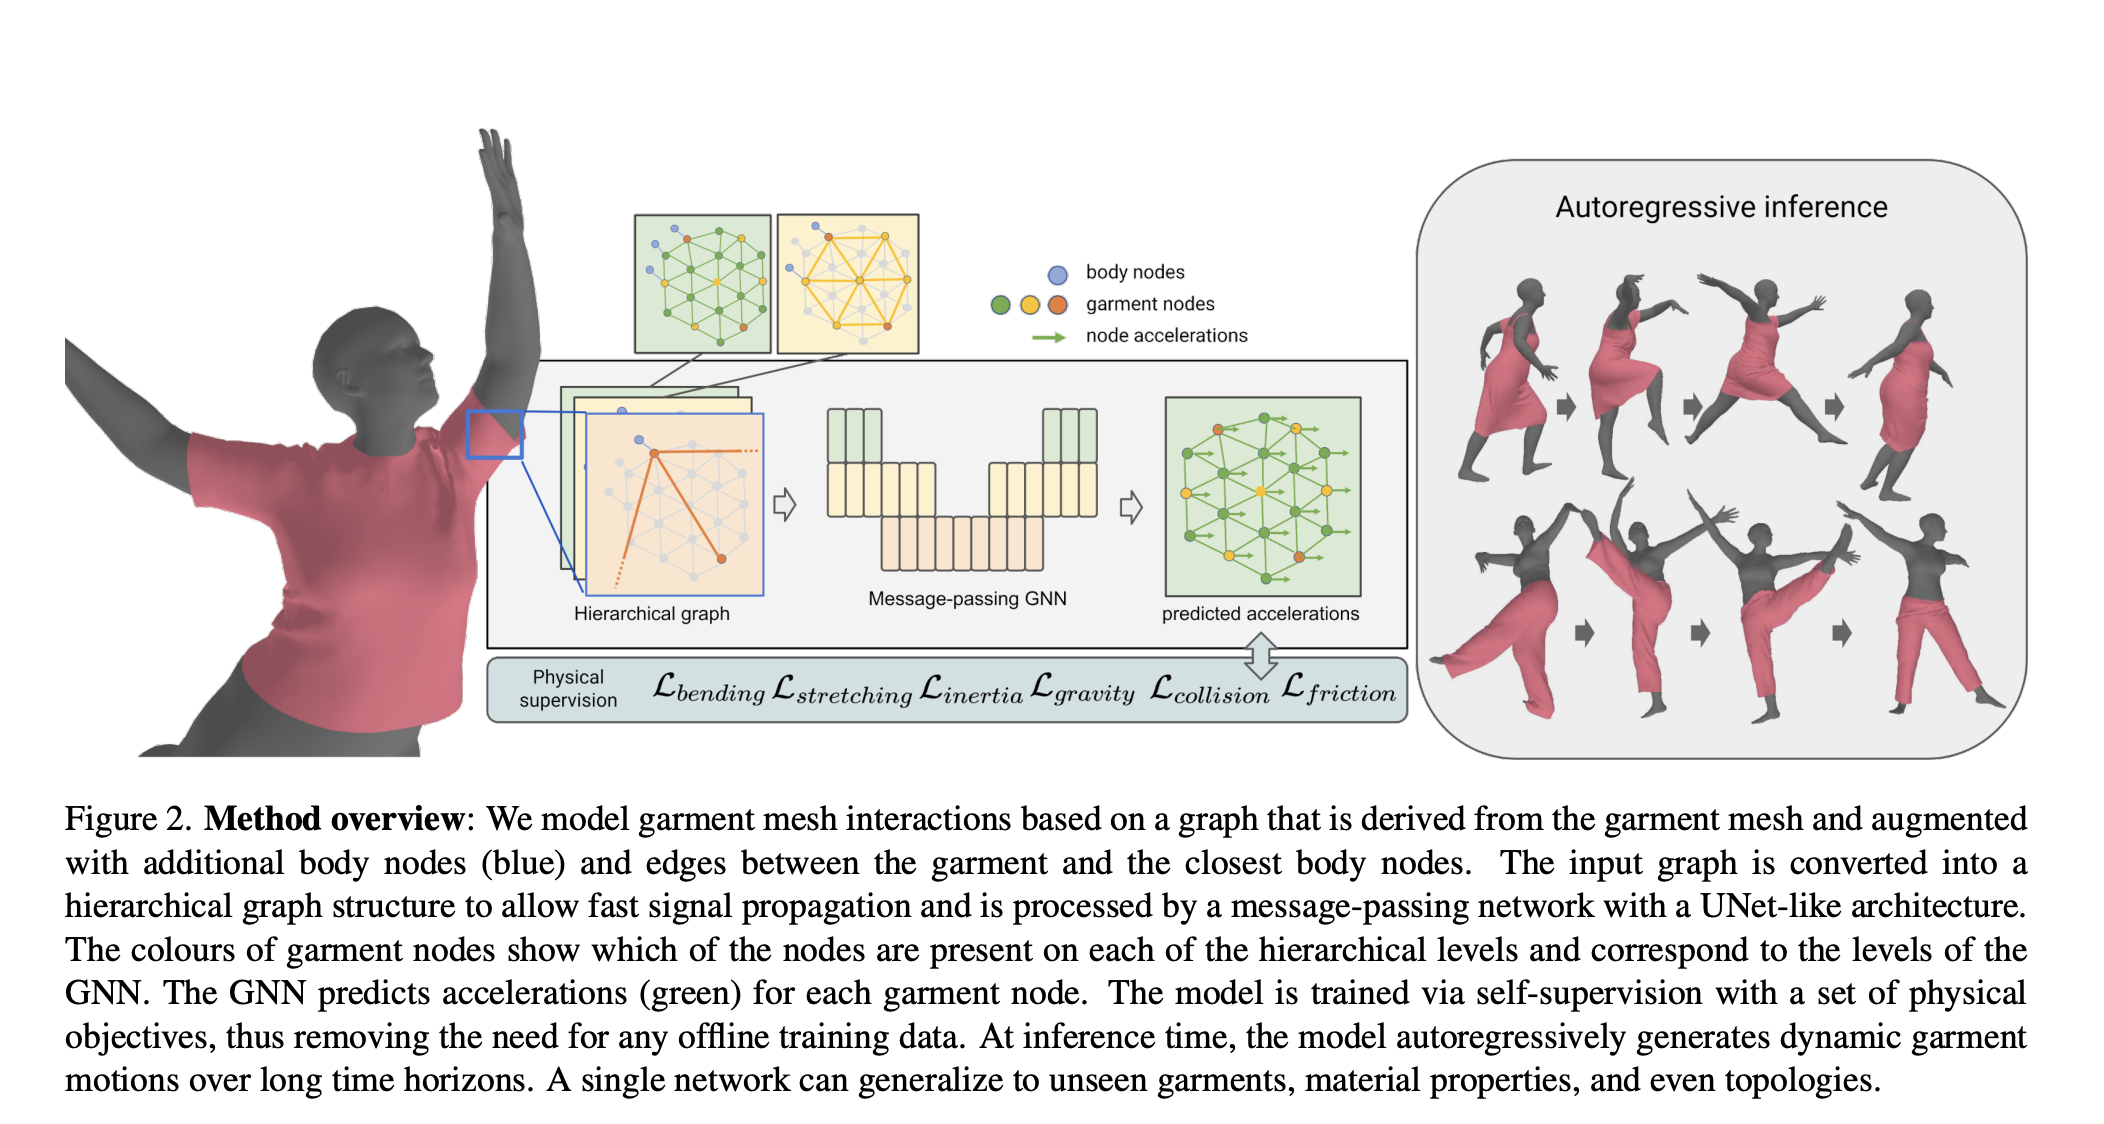 Researchers From ETH Zurich and Max Plank Propose HOOD: A New Method that Leverages Graph Neural Networks, Multi-Level Message Passing, and Unsupervised Training to Enable Efficient Prediction of Realistic Clothing Dynamics